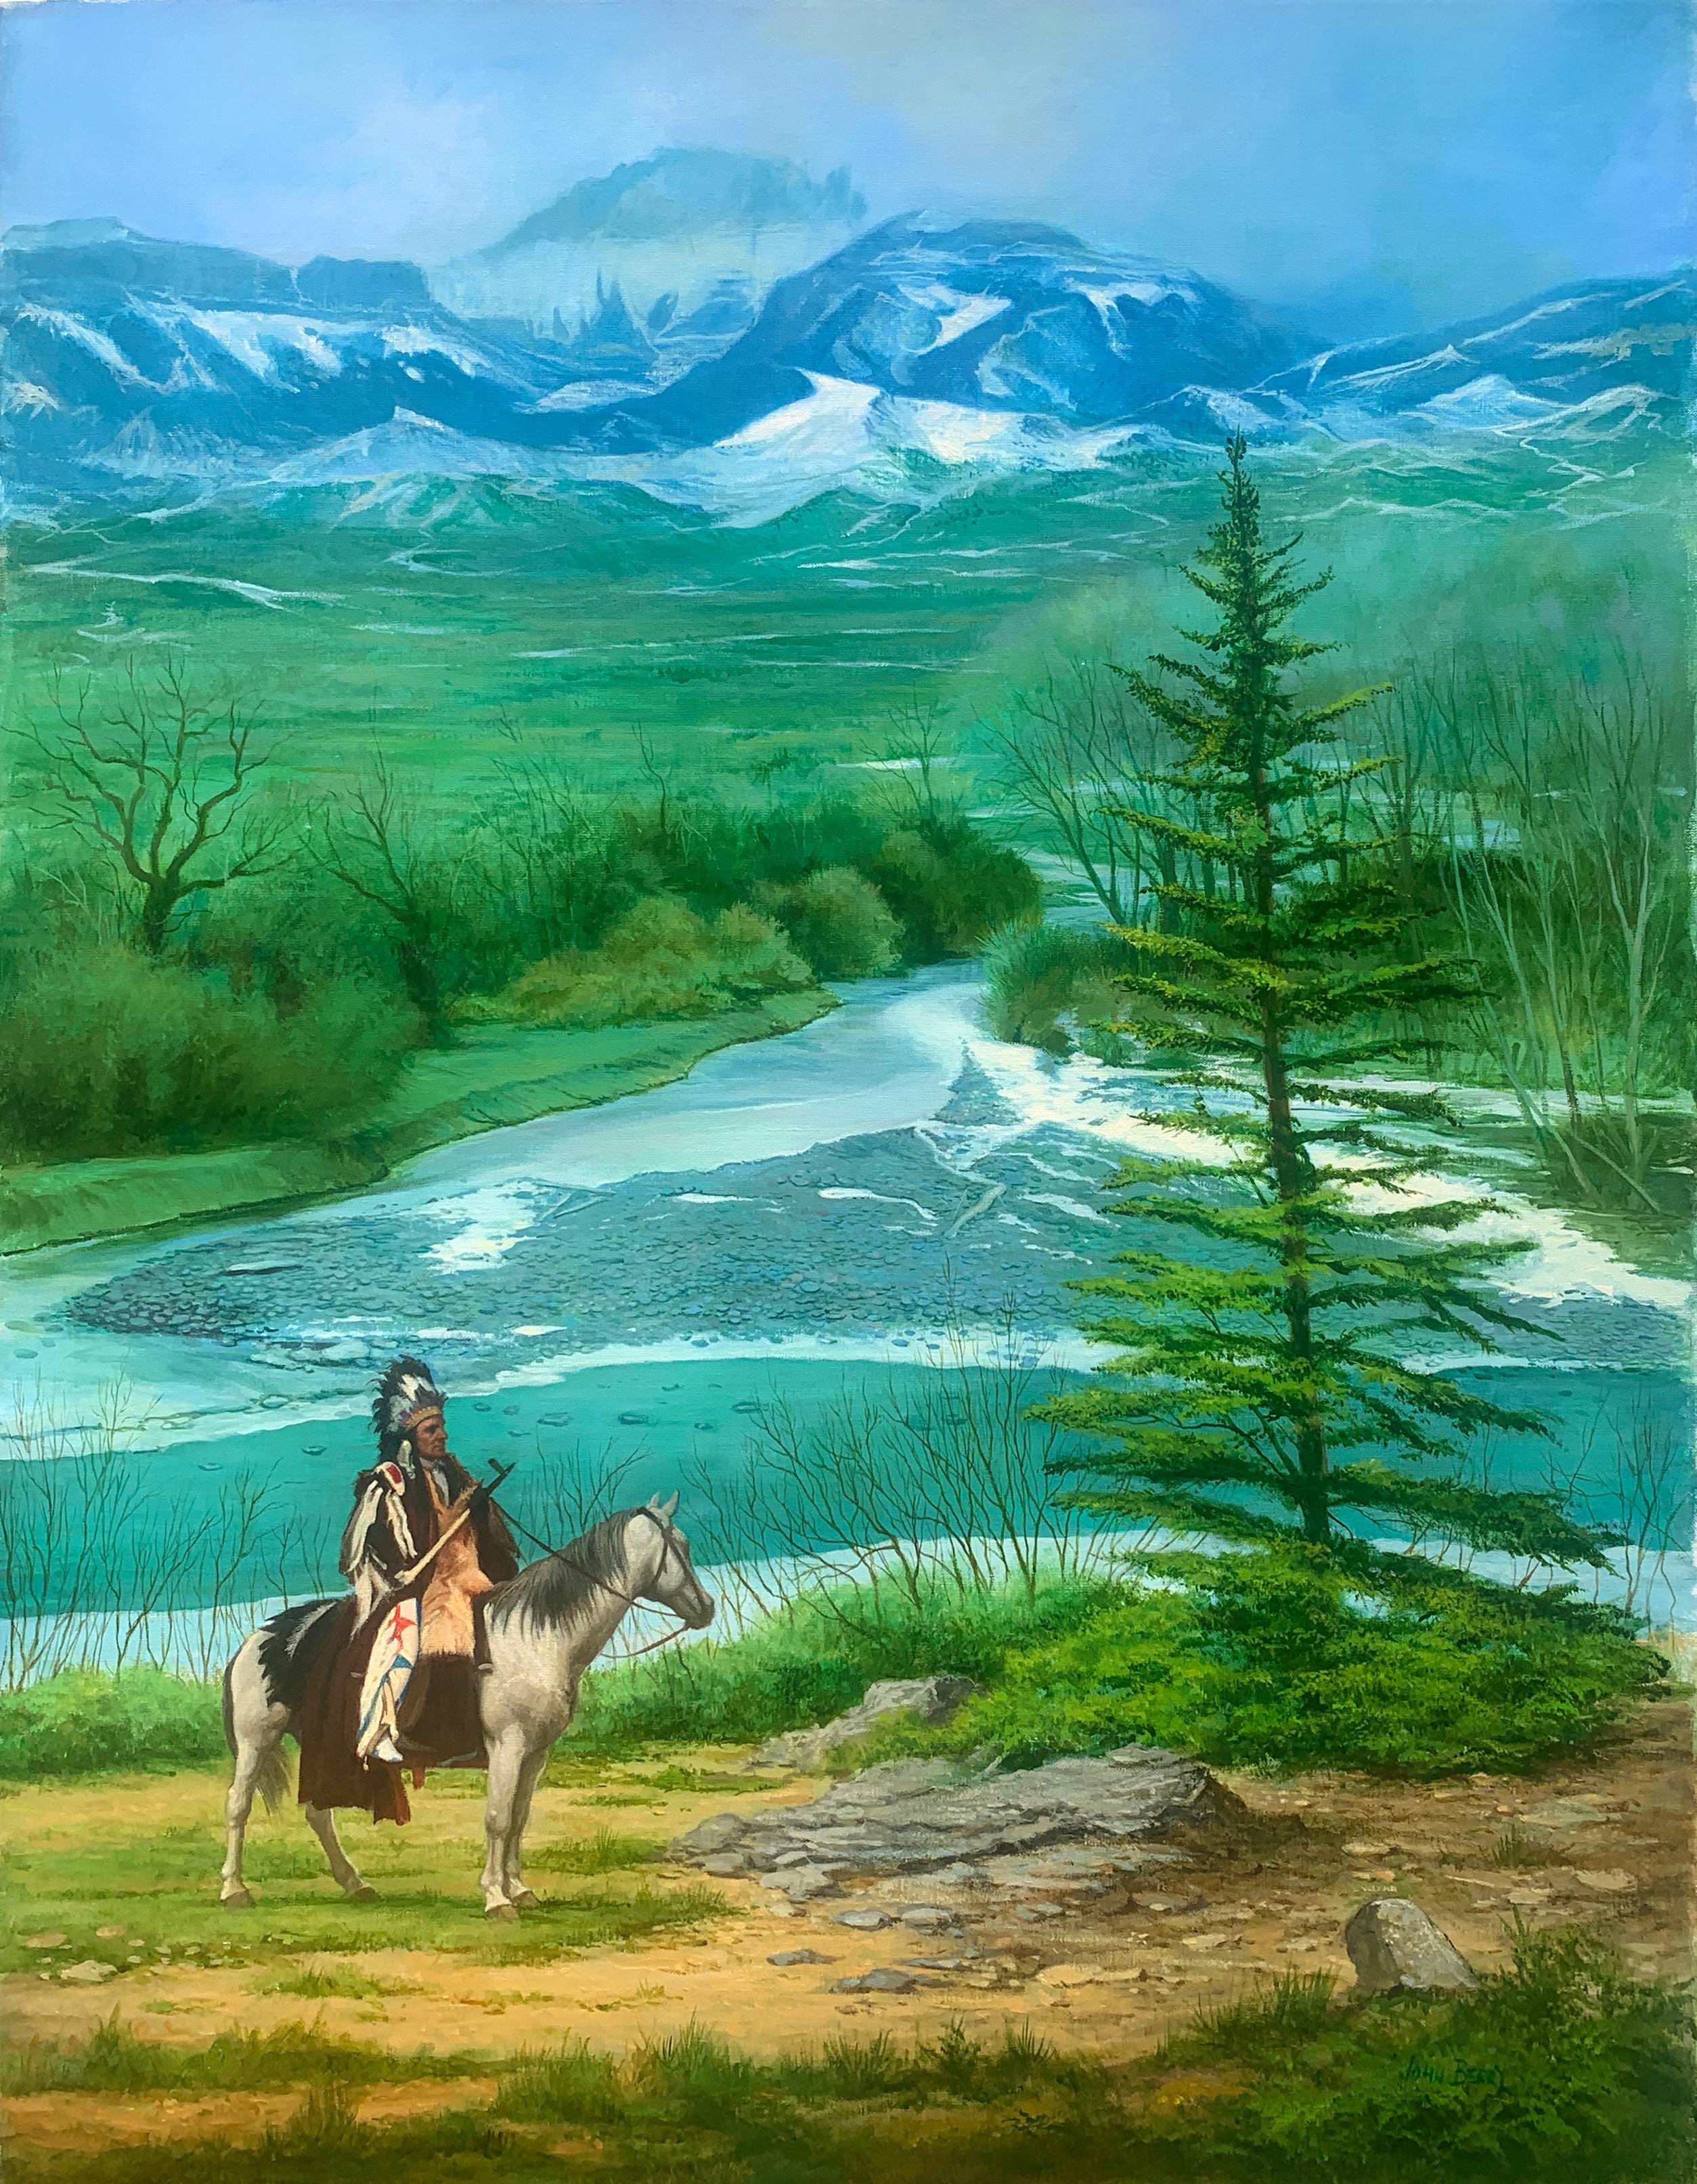 "Solitary", John Berry, Native American Indians, Realism, Oil/Canvas, 40x30 in